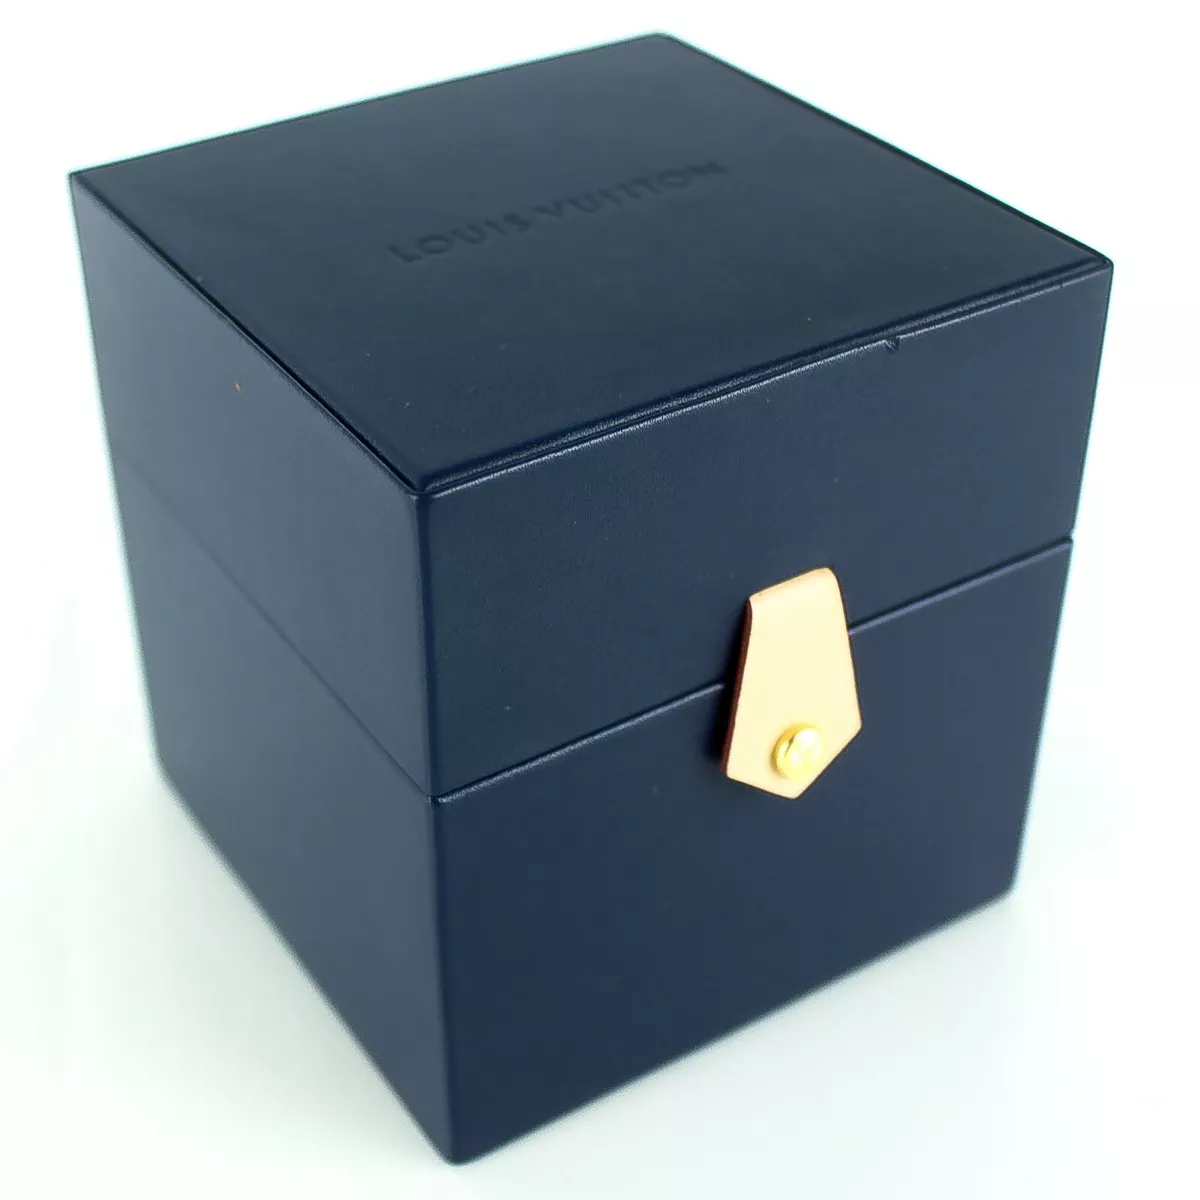 Auth LOUIS VUITTON Leather Watch Holder Box Only Not Available in Stores